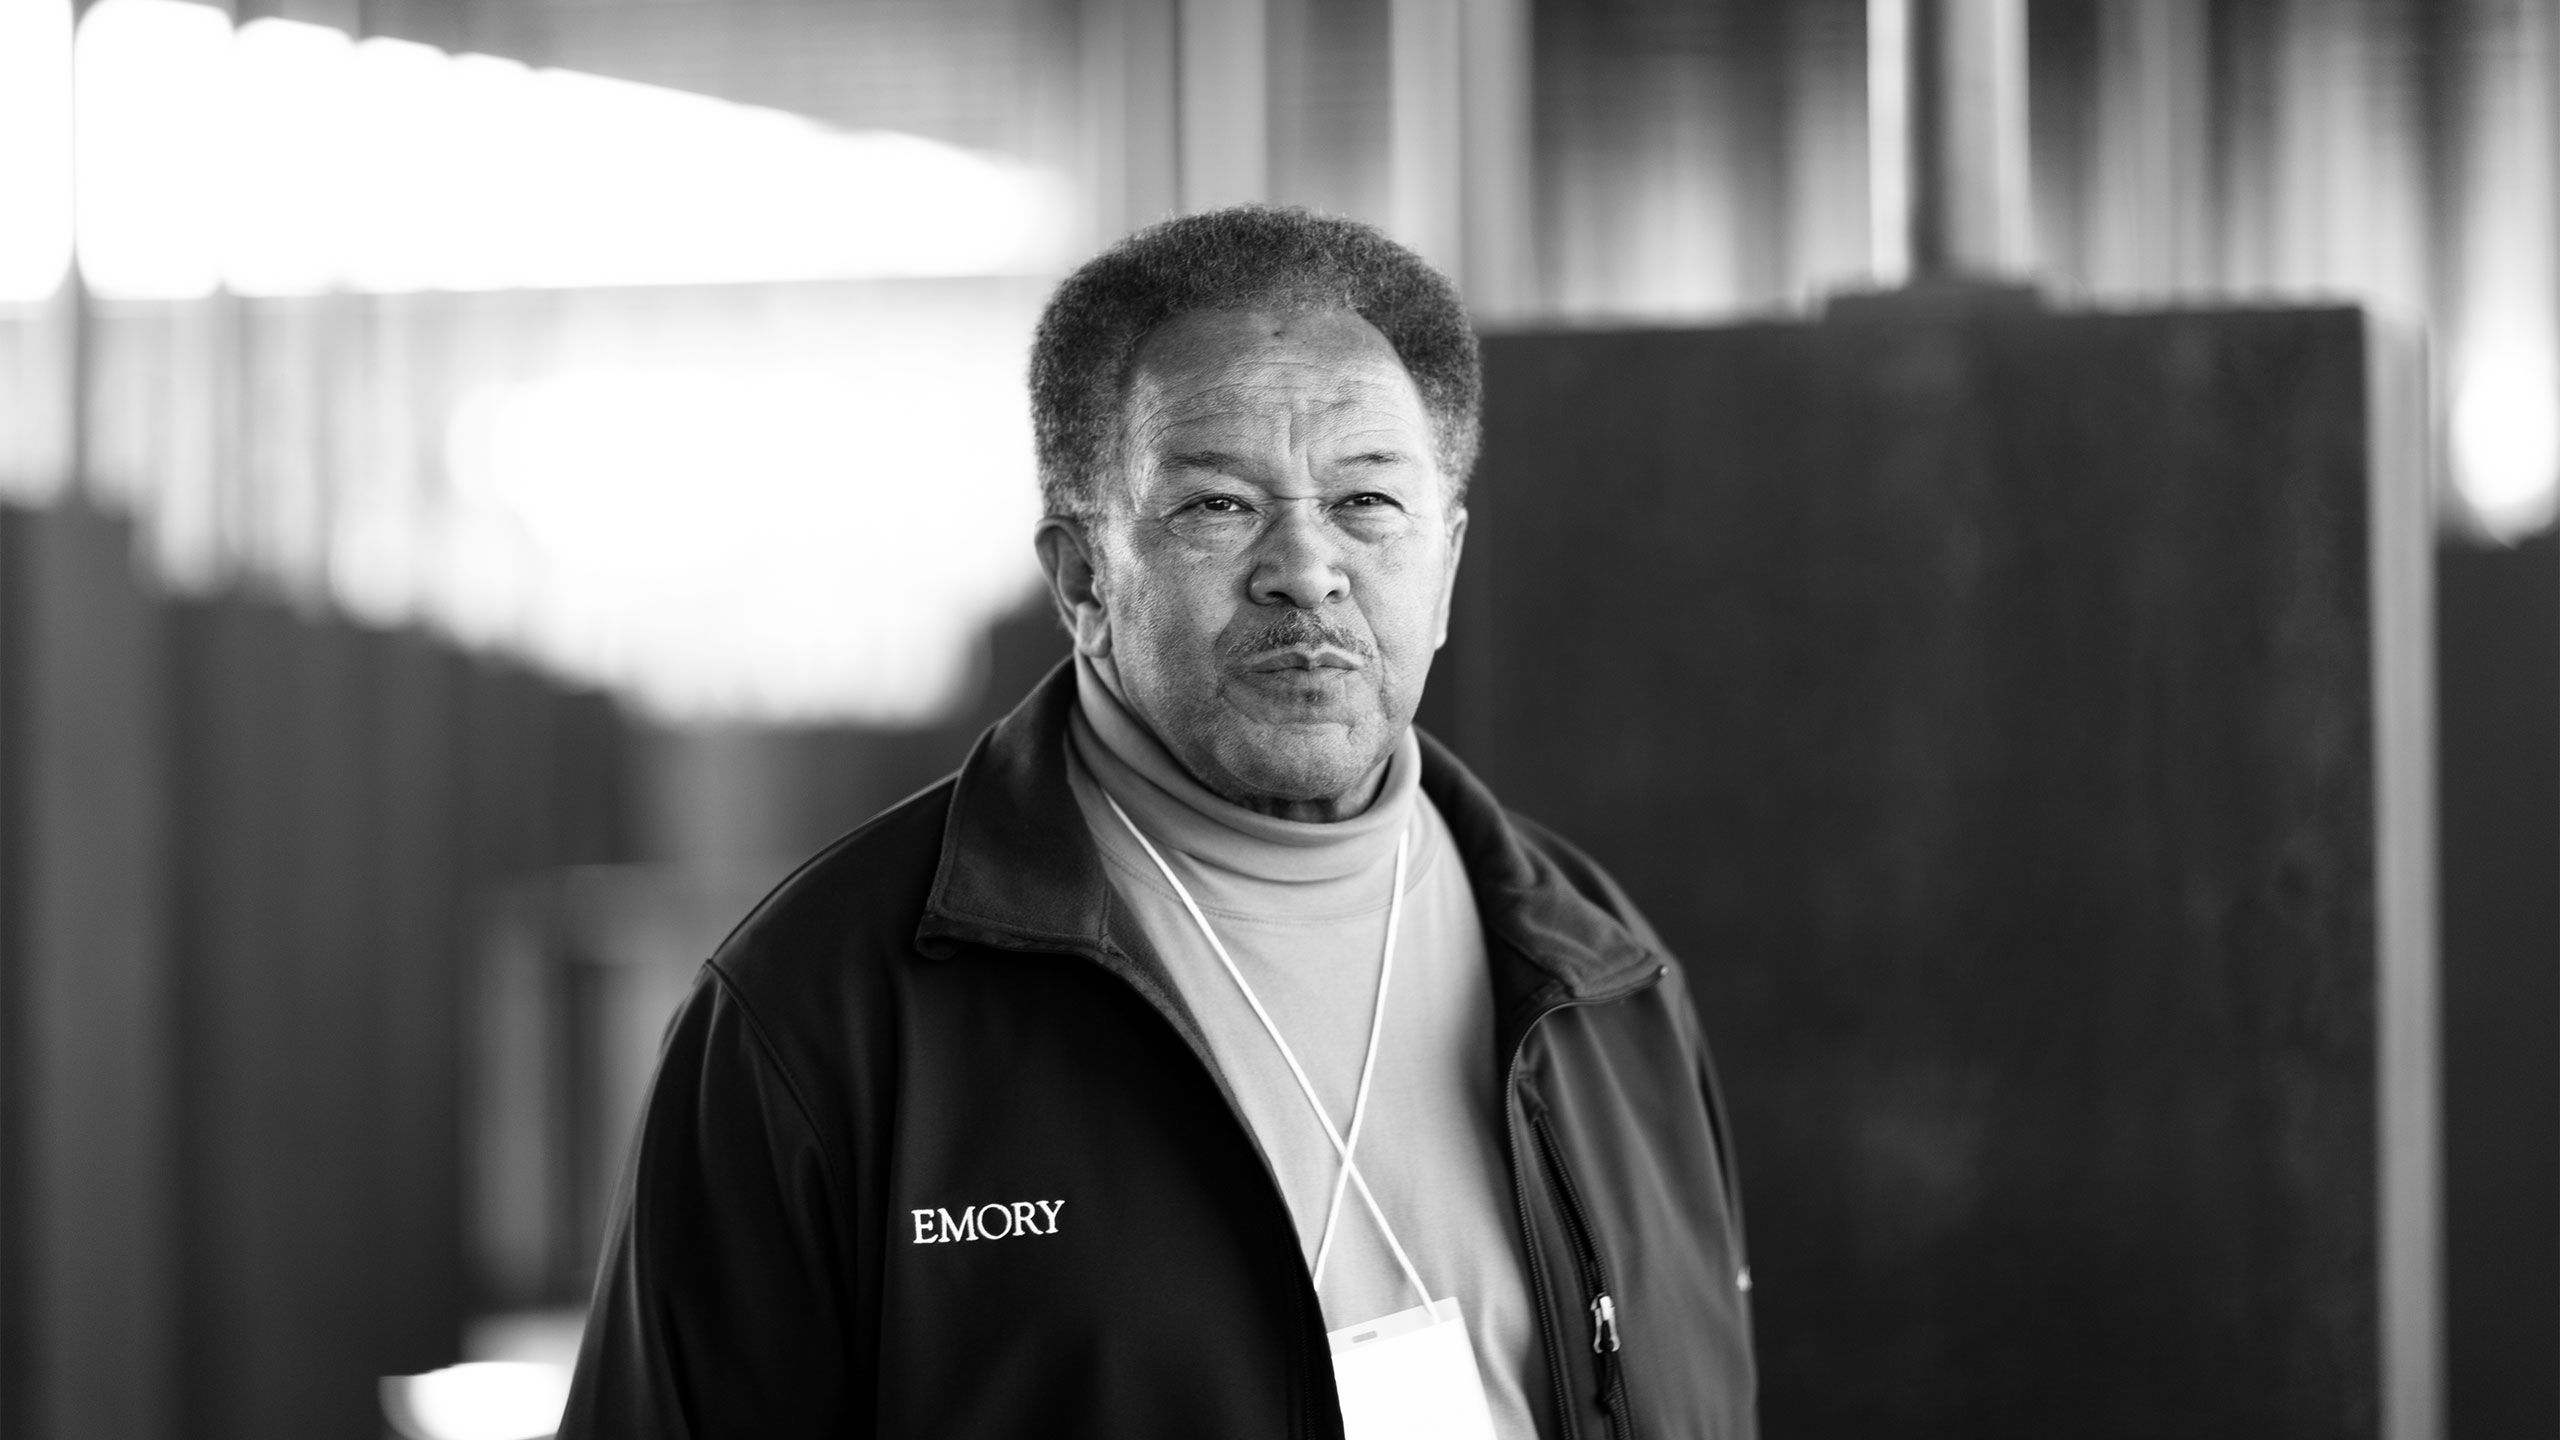 A portrait shows Robert Franklin wearing an Emory jacket and standing in the National Memorial for Peace and Justice.